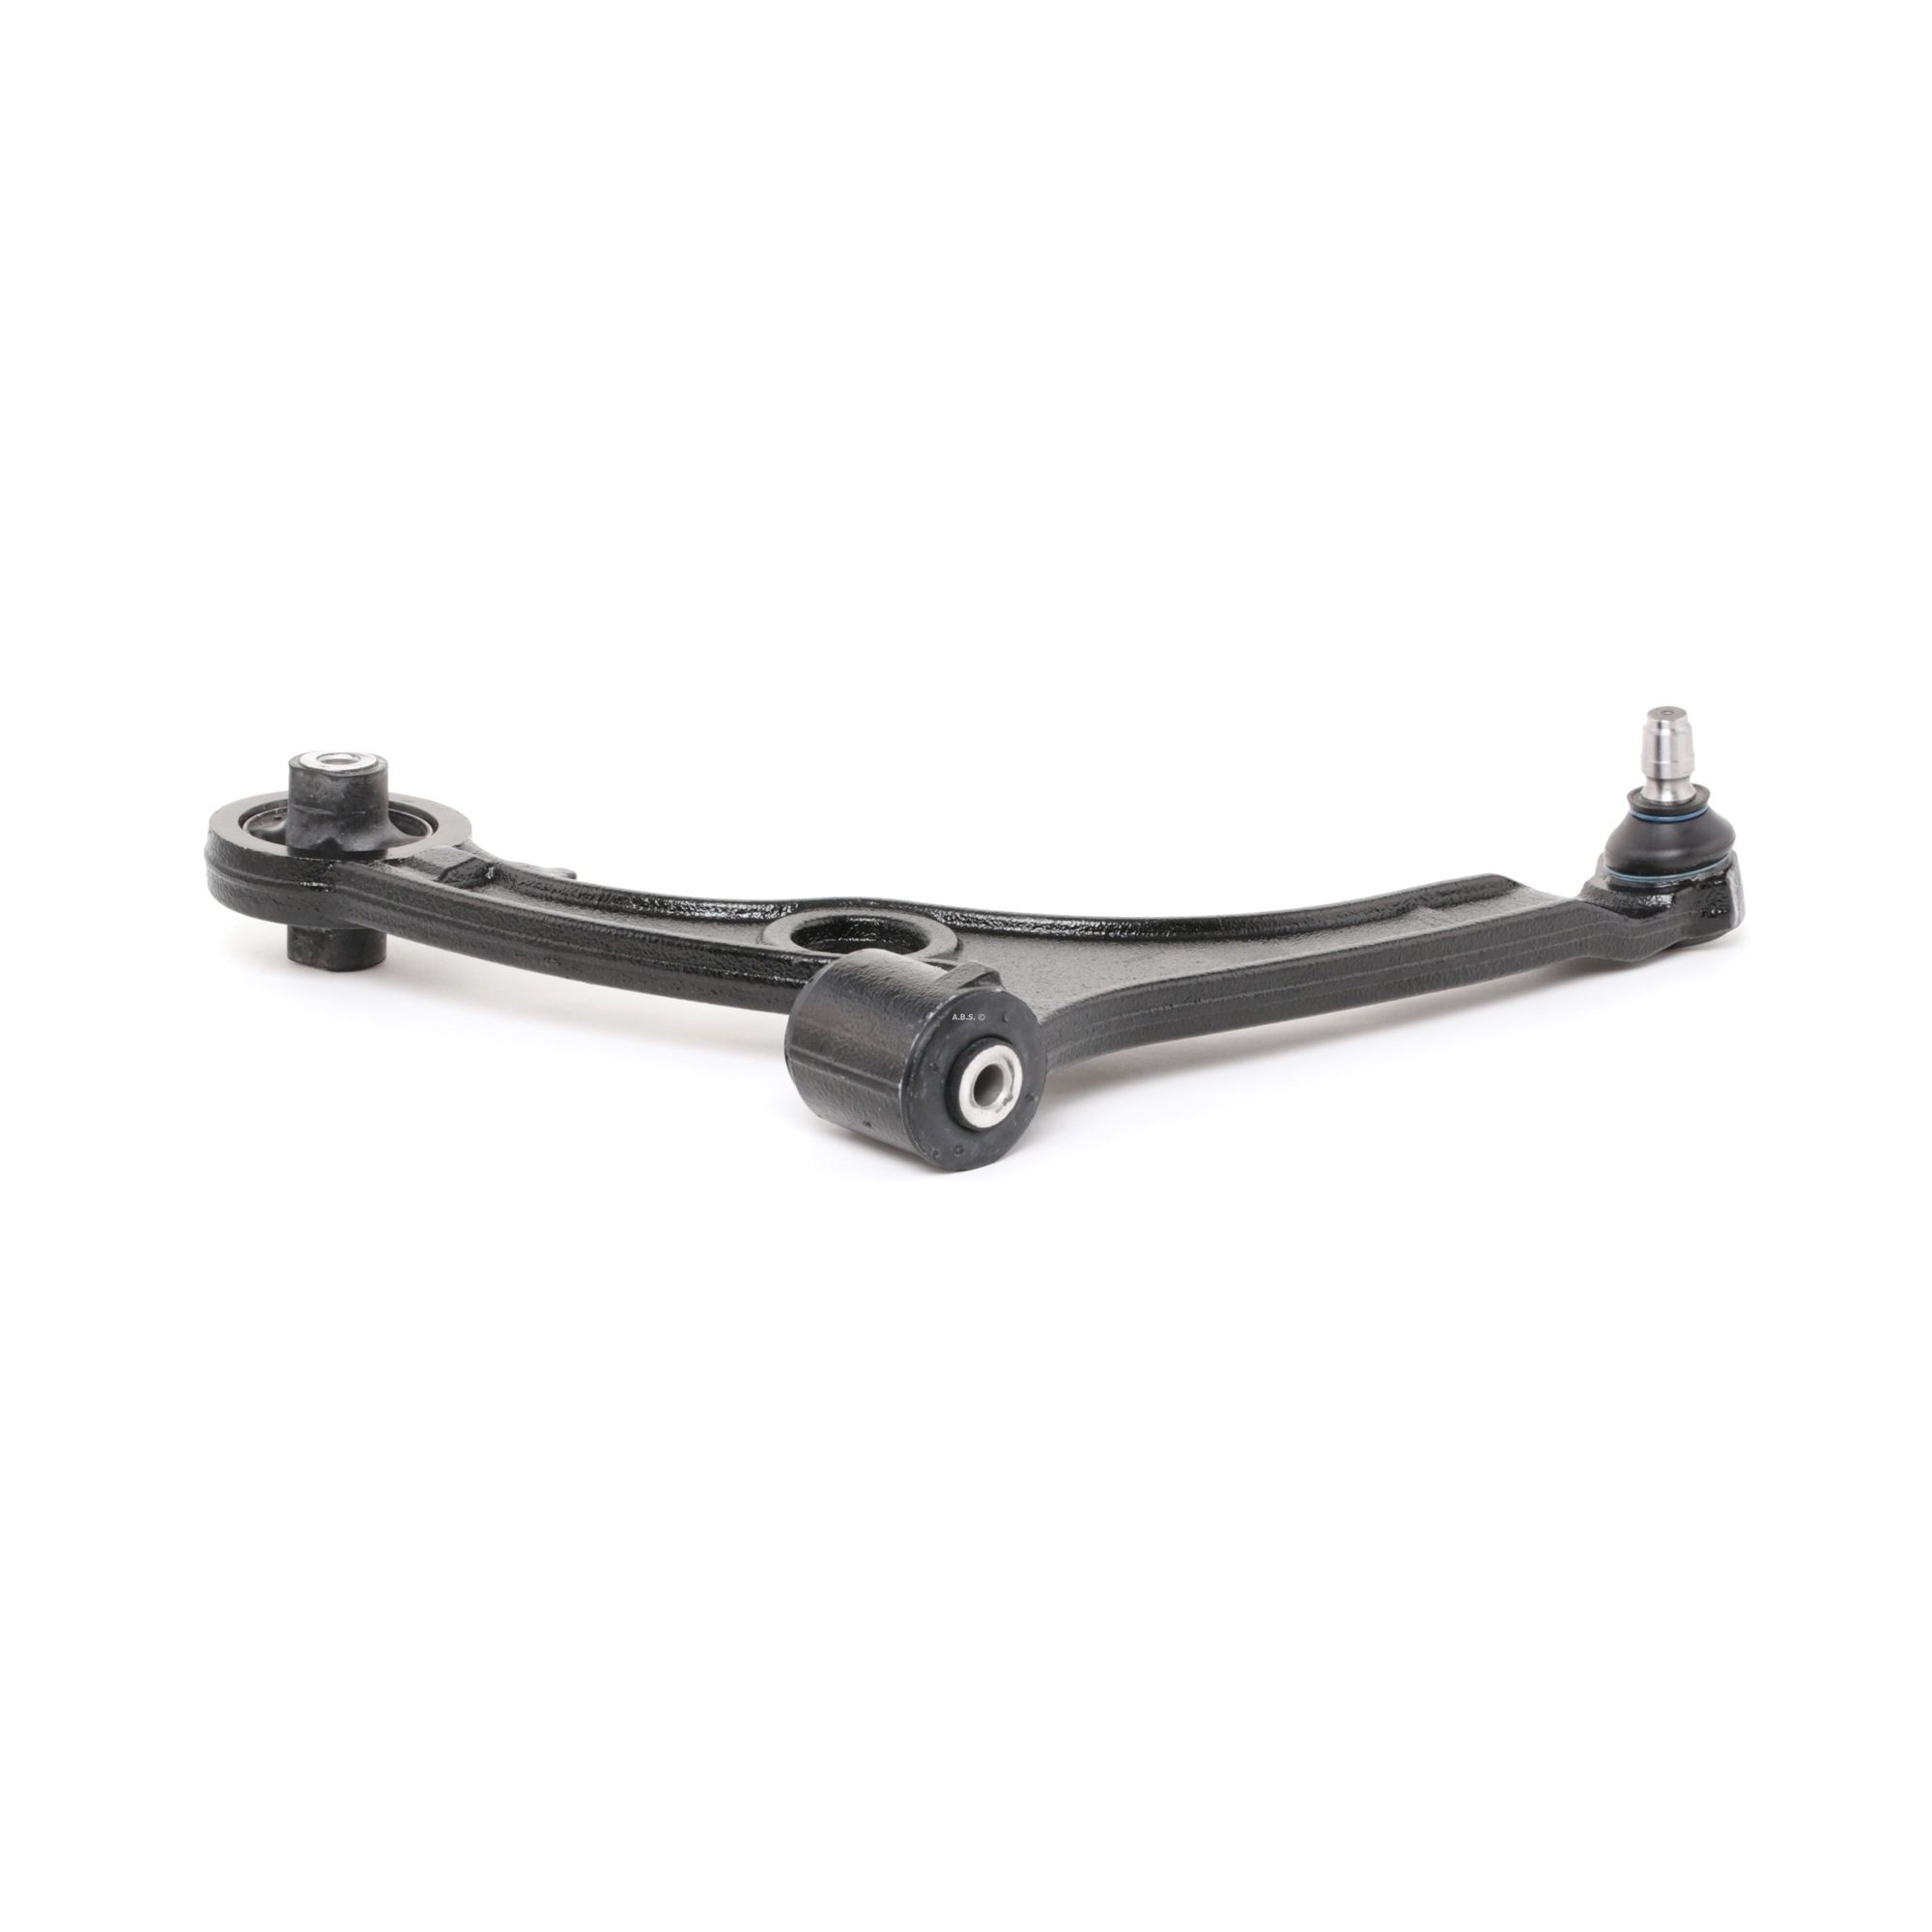 A.B.S. 211156 Suspension arm with ball joint, with rubber mount, Control Arm, Cast Steel, Cone Size: 17 mm